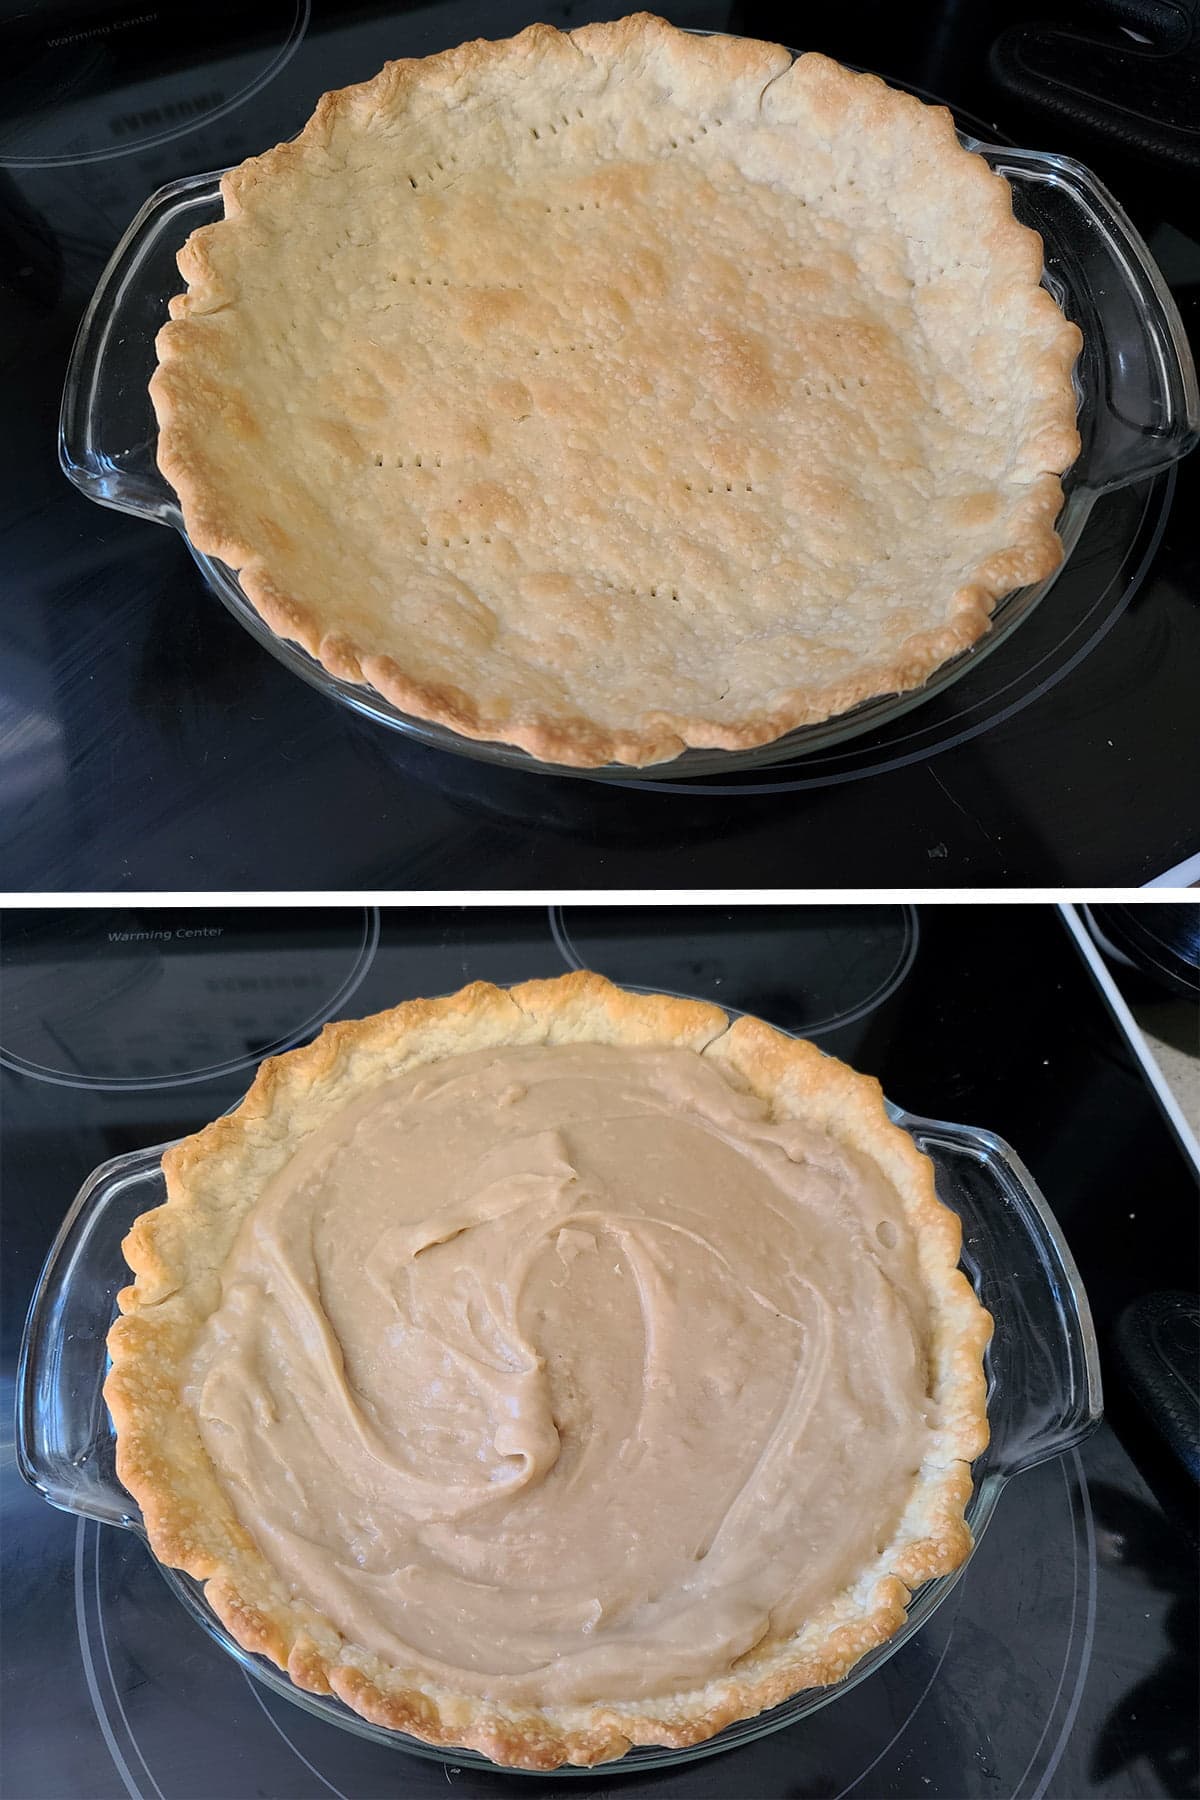 A two part image showing an empty pie crust, and then the pie crust filled with earl grey custard.